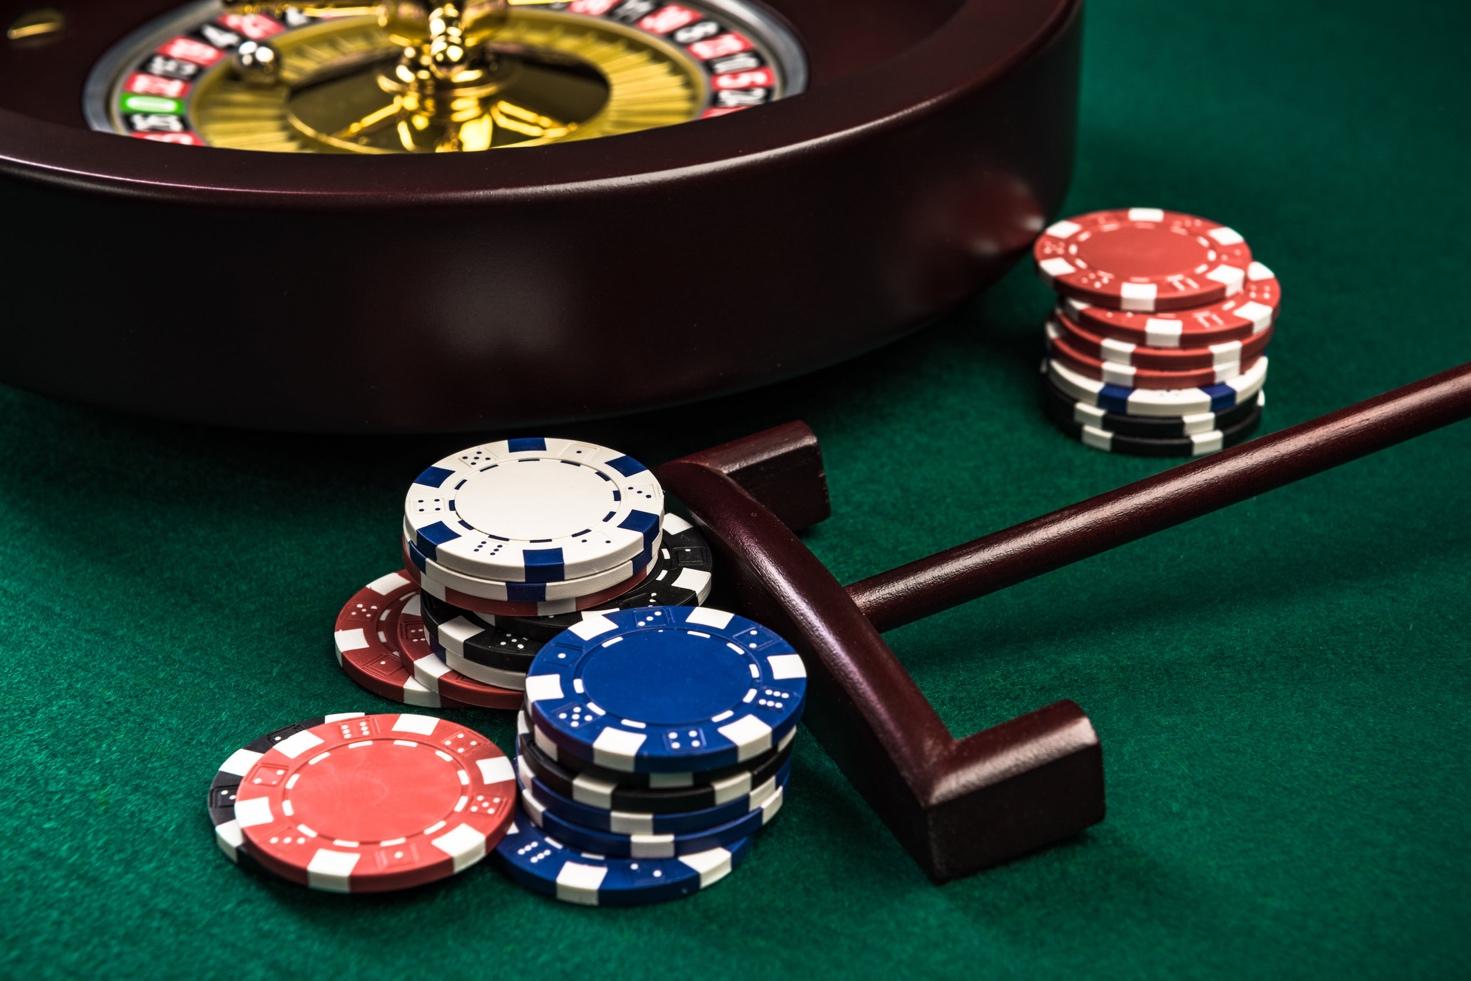 A close-up of a roulette wheel and poker chips

Description automatically generated with low confidence